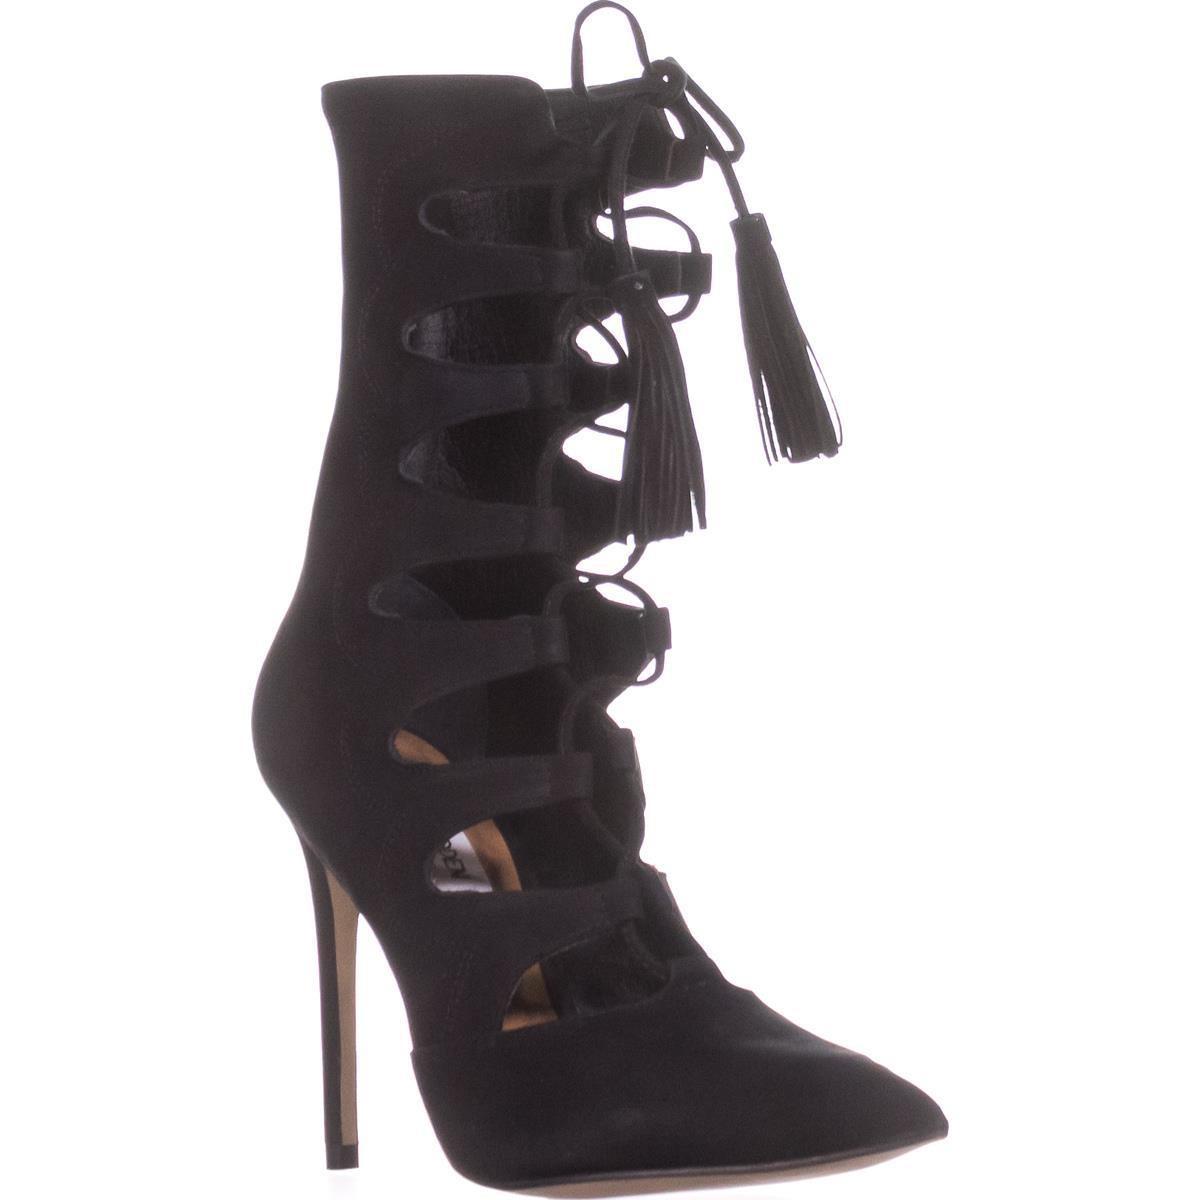 Steve Madden Piper Pointed Toe Lace Up Boots in Black - Lyst